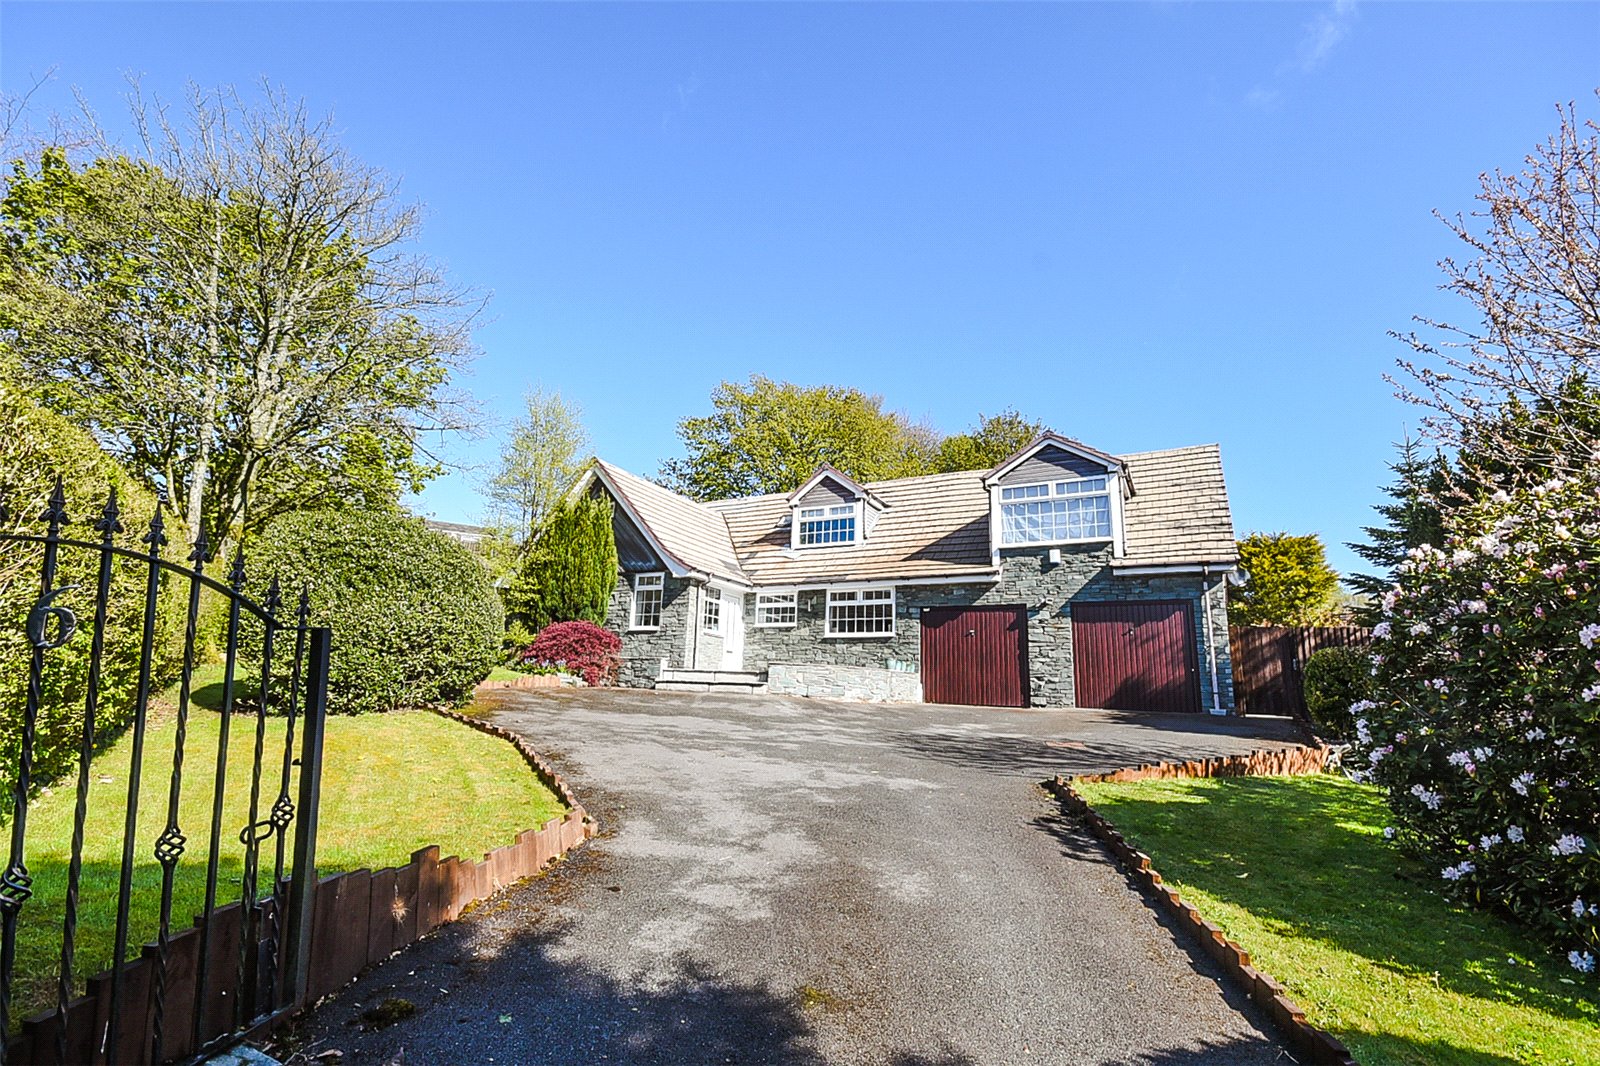 5 Bedroom Detached House for sale in littleborough greater manchester